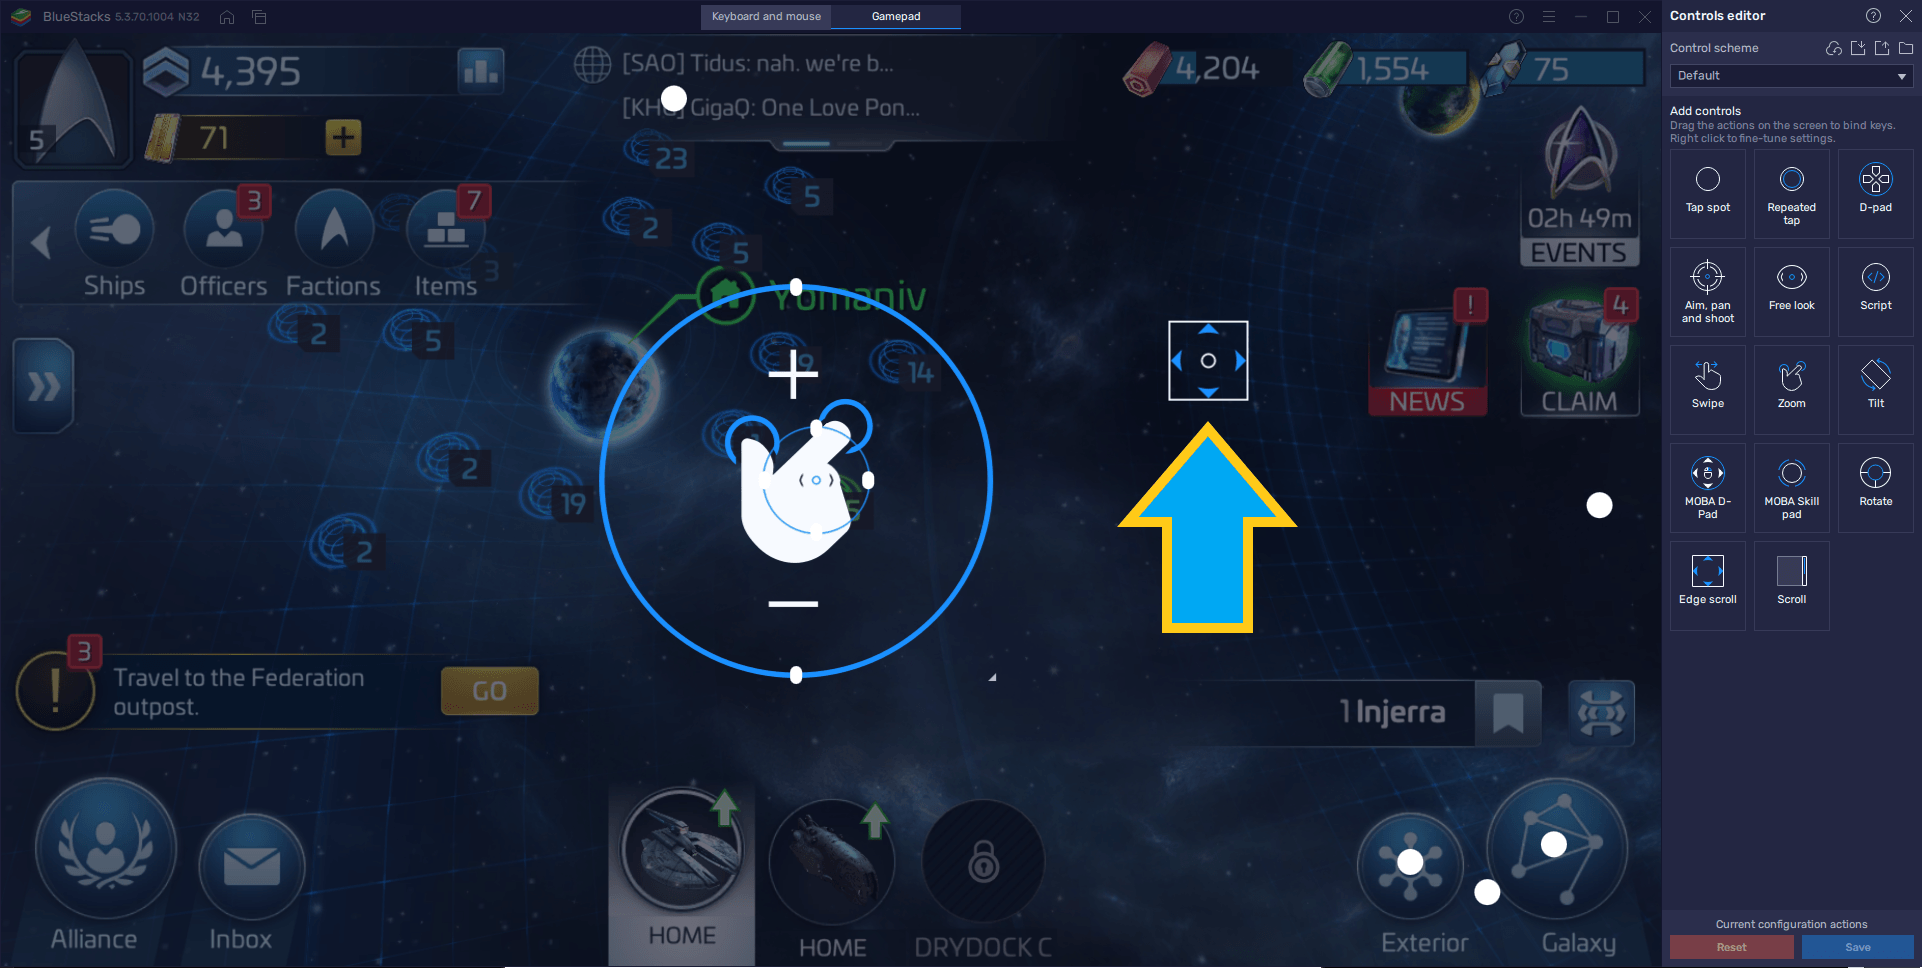 Play Star Trek Fleet Command on BlueStacks to Get the Best Controls, Graphics, Performance, and More